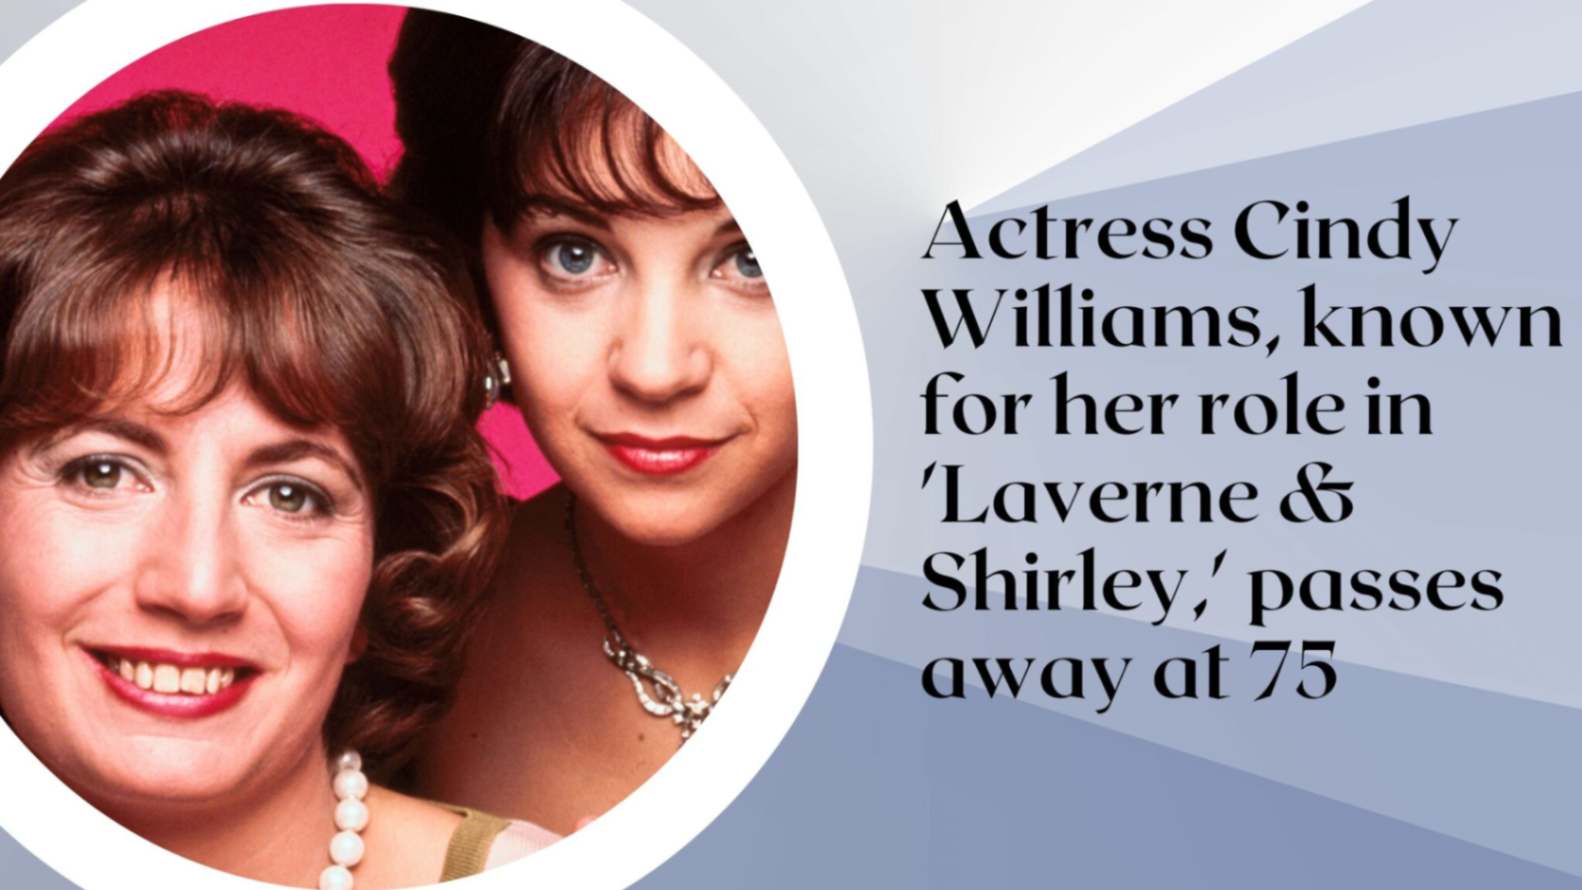 Actress Cindy Williams, known for her role in ‘Laverne & Shirley,’ passes away at 75